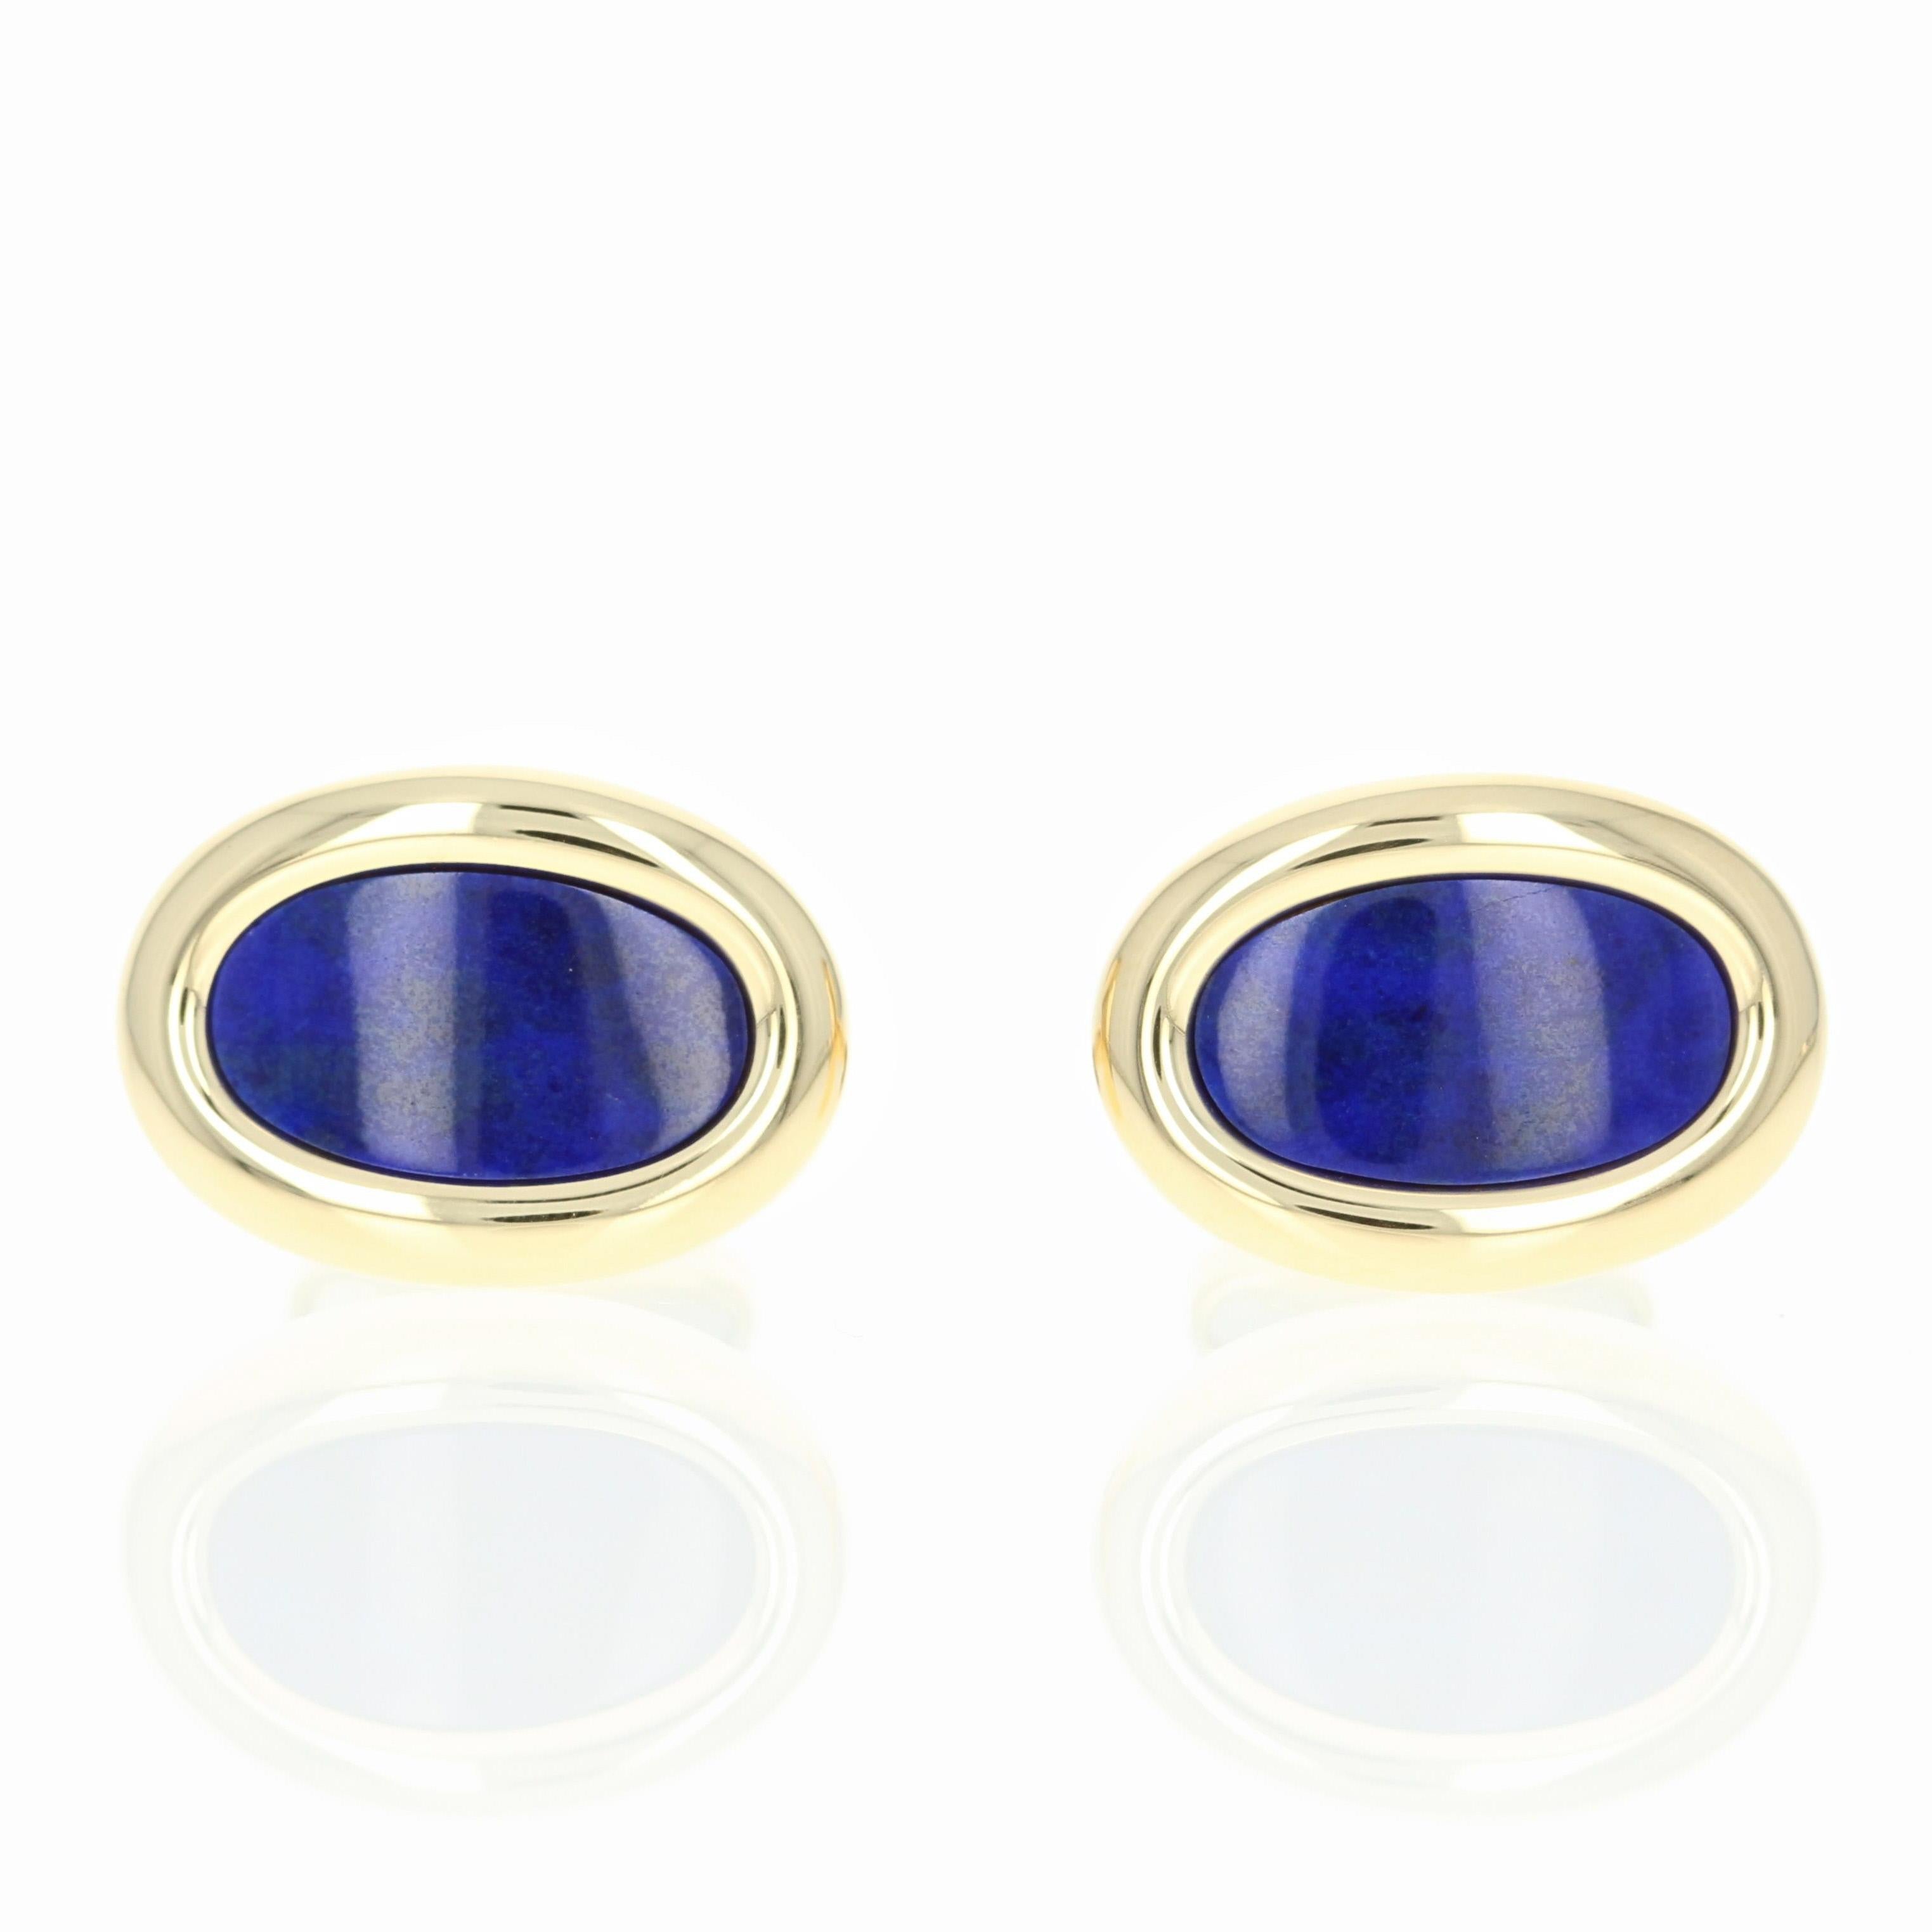 This sharp tuxedo set will be an exceptional gift for the well-dressed gentleman in your life! Crafted by Mayor’s in 18k yellow gold, this set consists of a pair of cufflinks and four matching shirt studs which are all set with top quality lapis